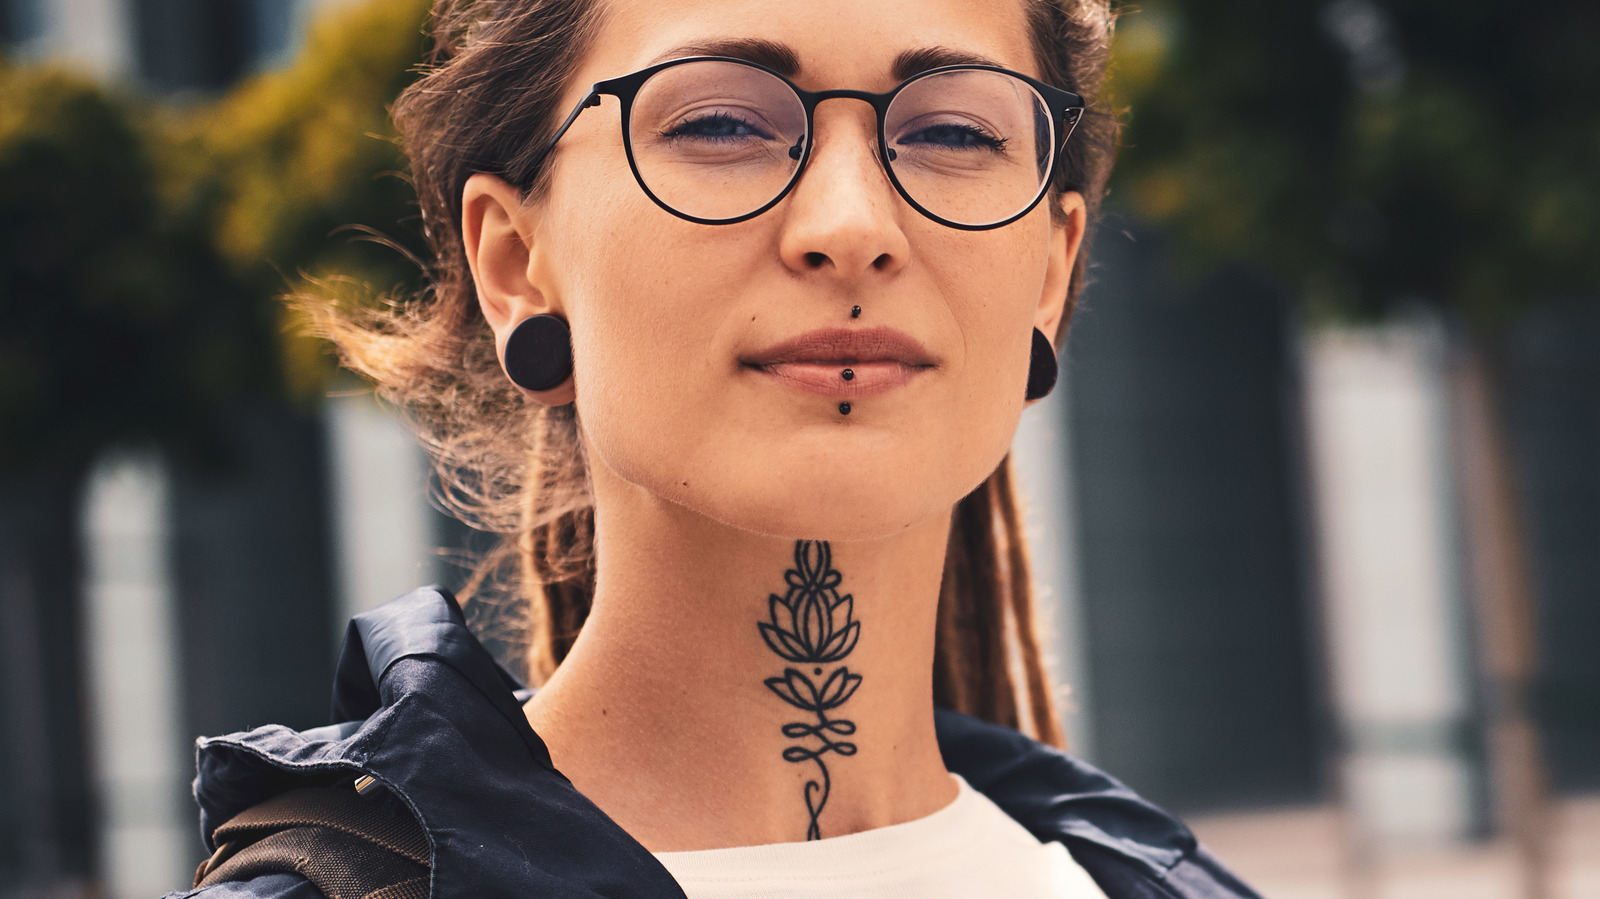 Are Face and Neck Tattoos a Bad Idea? - AuthorityTattoo